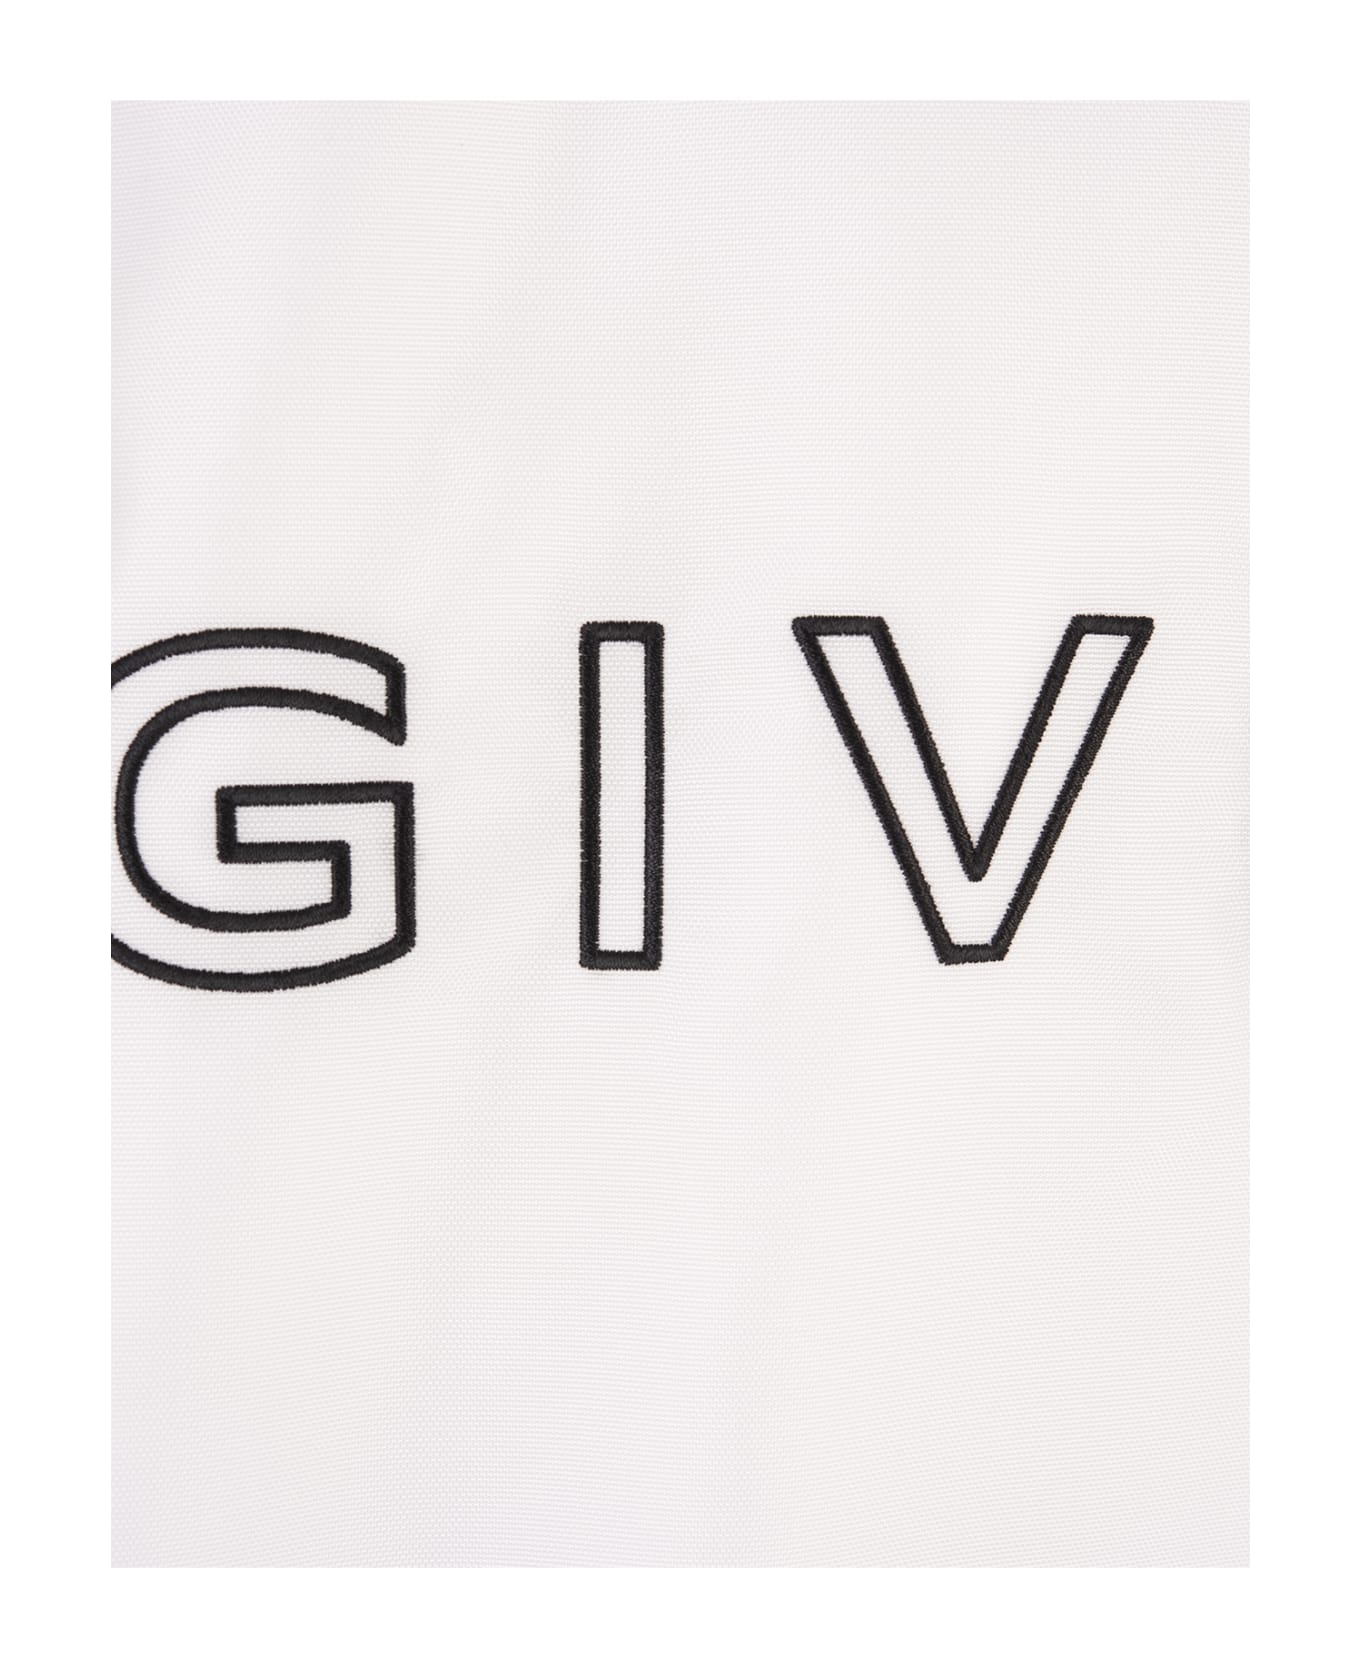 Givenchy Black/white Givenchy Reversible Football Parka In Fleece - White